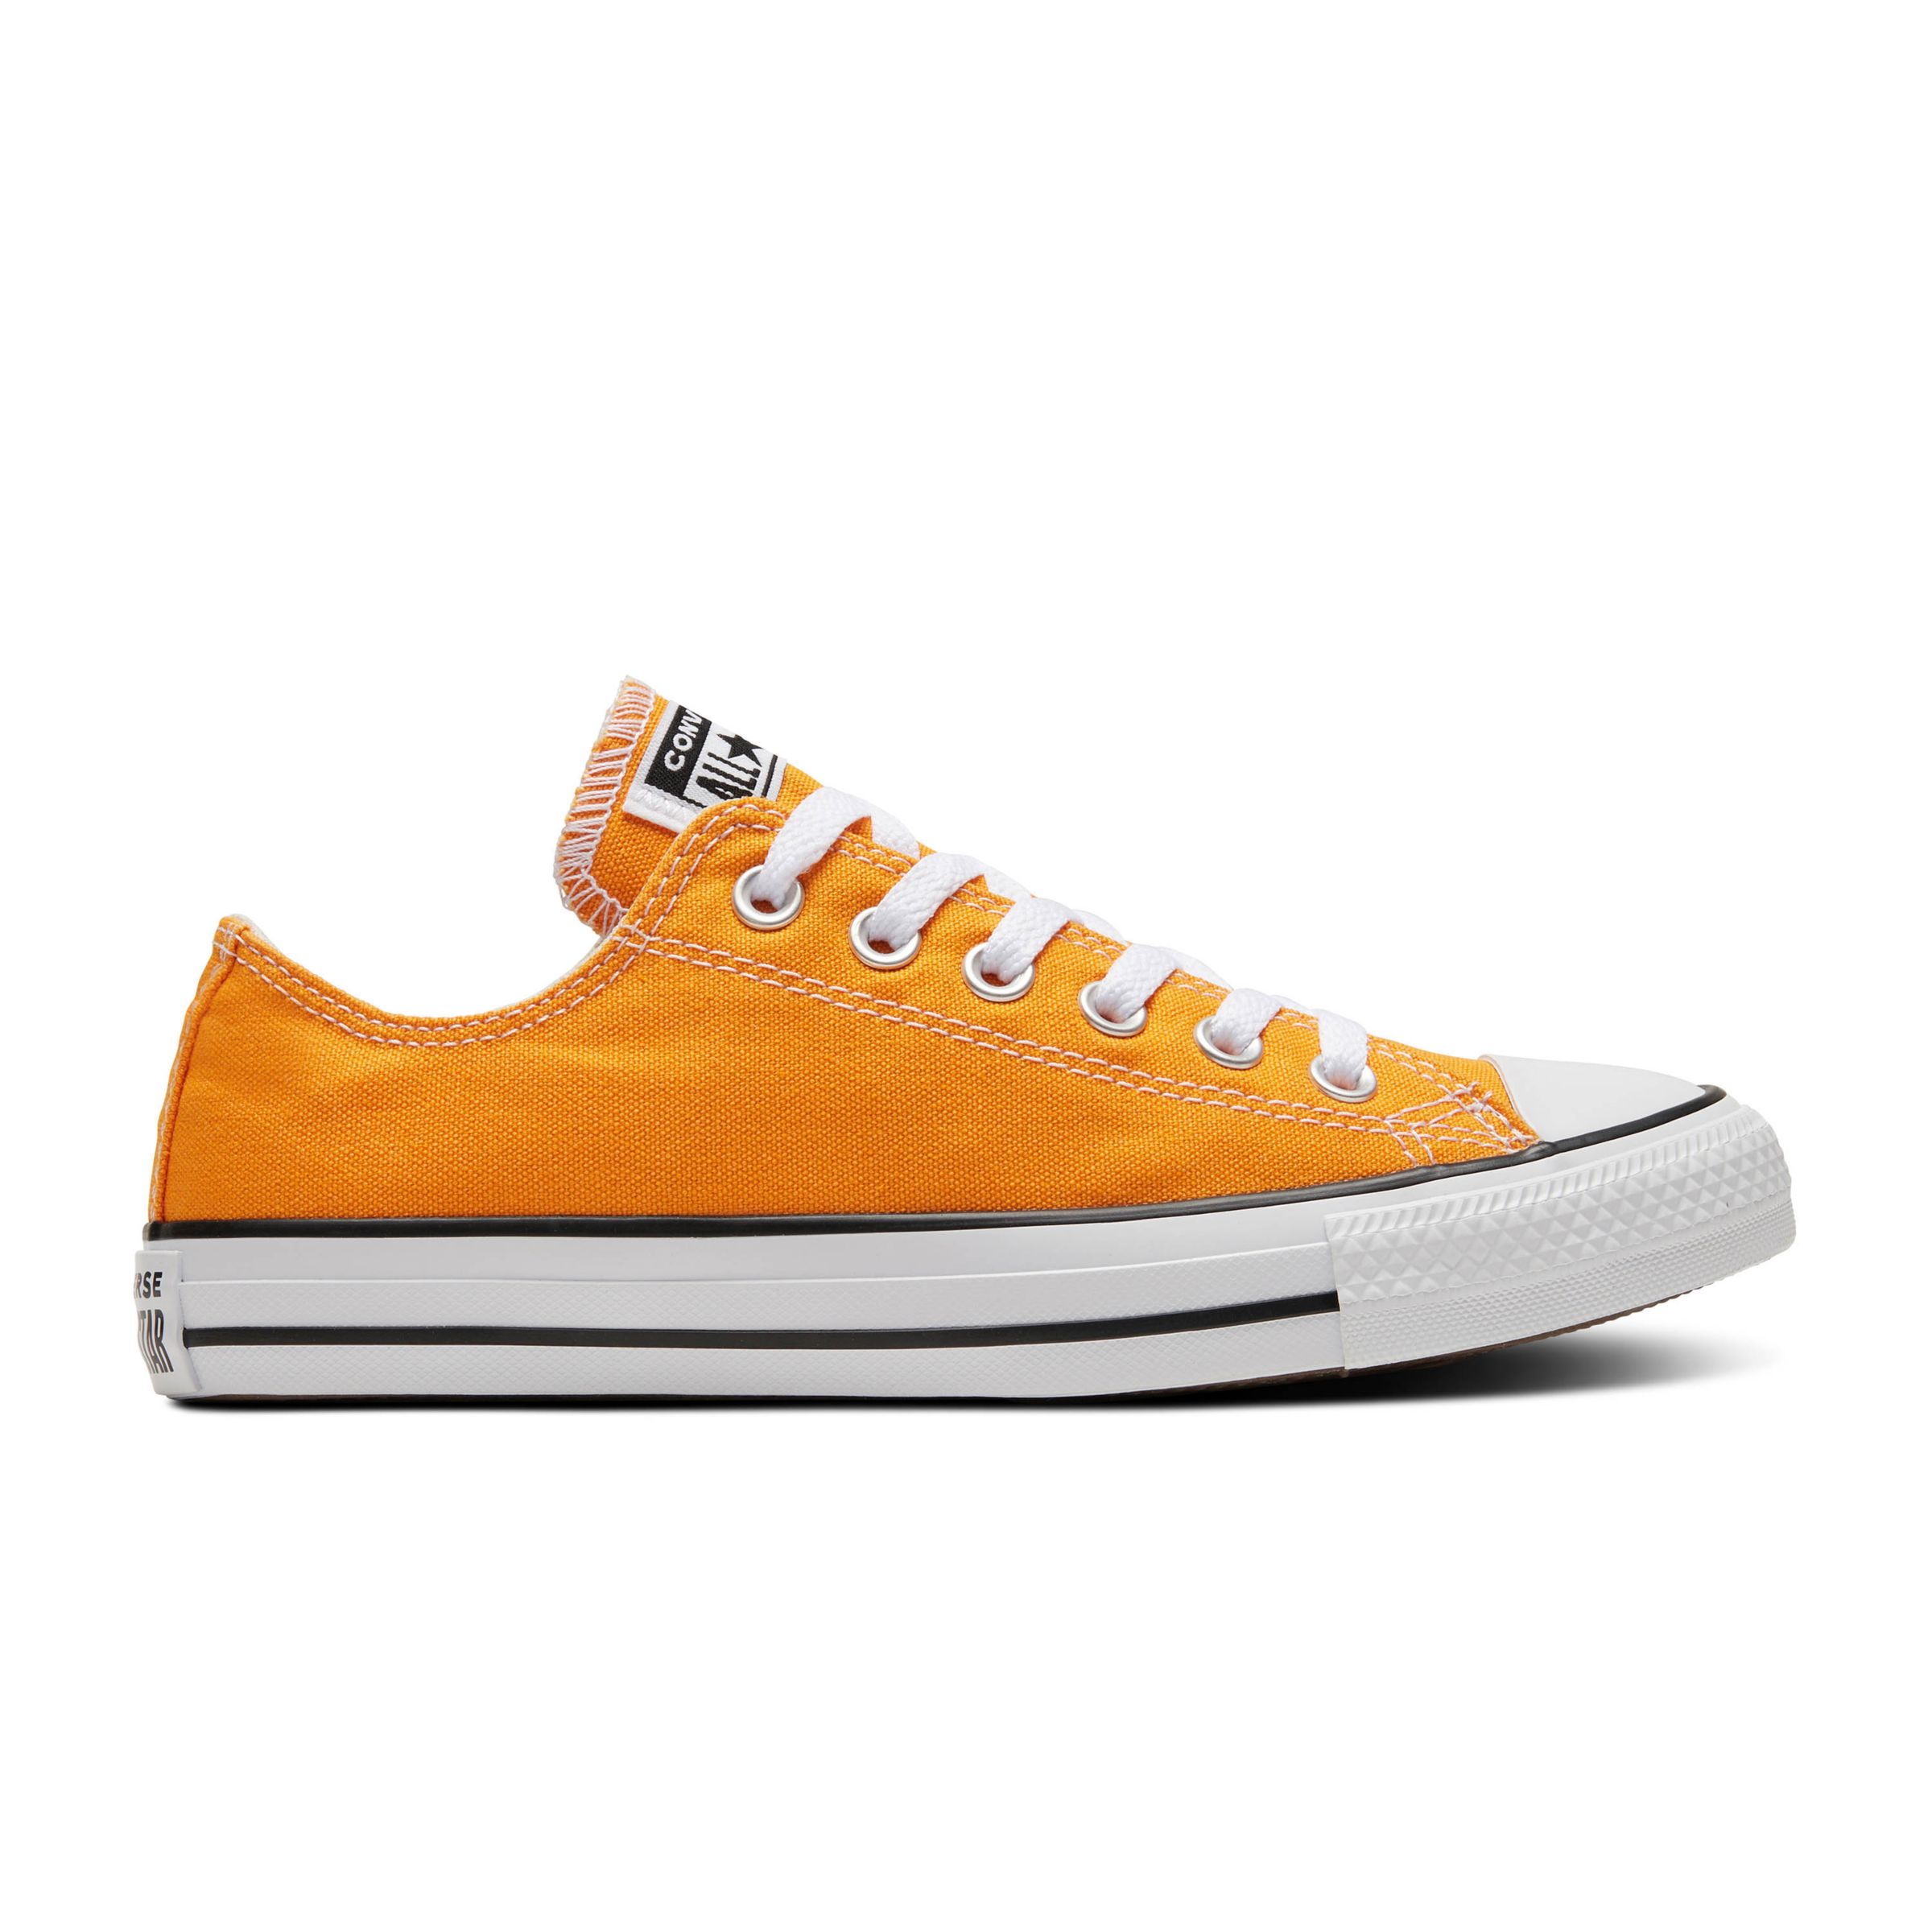 Converse Chuck Taylor All Star Ox Womens Trainers in 